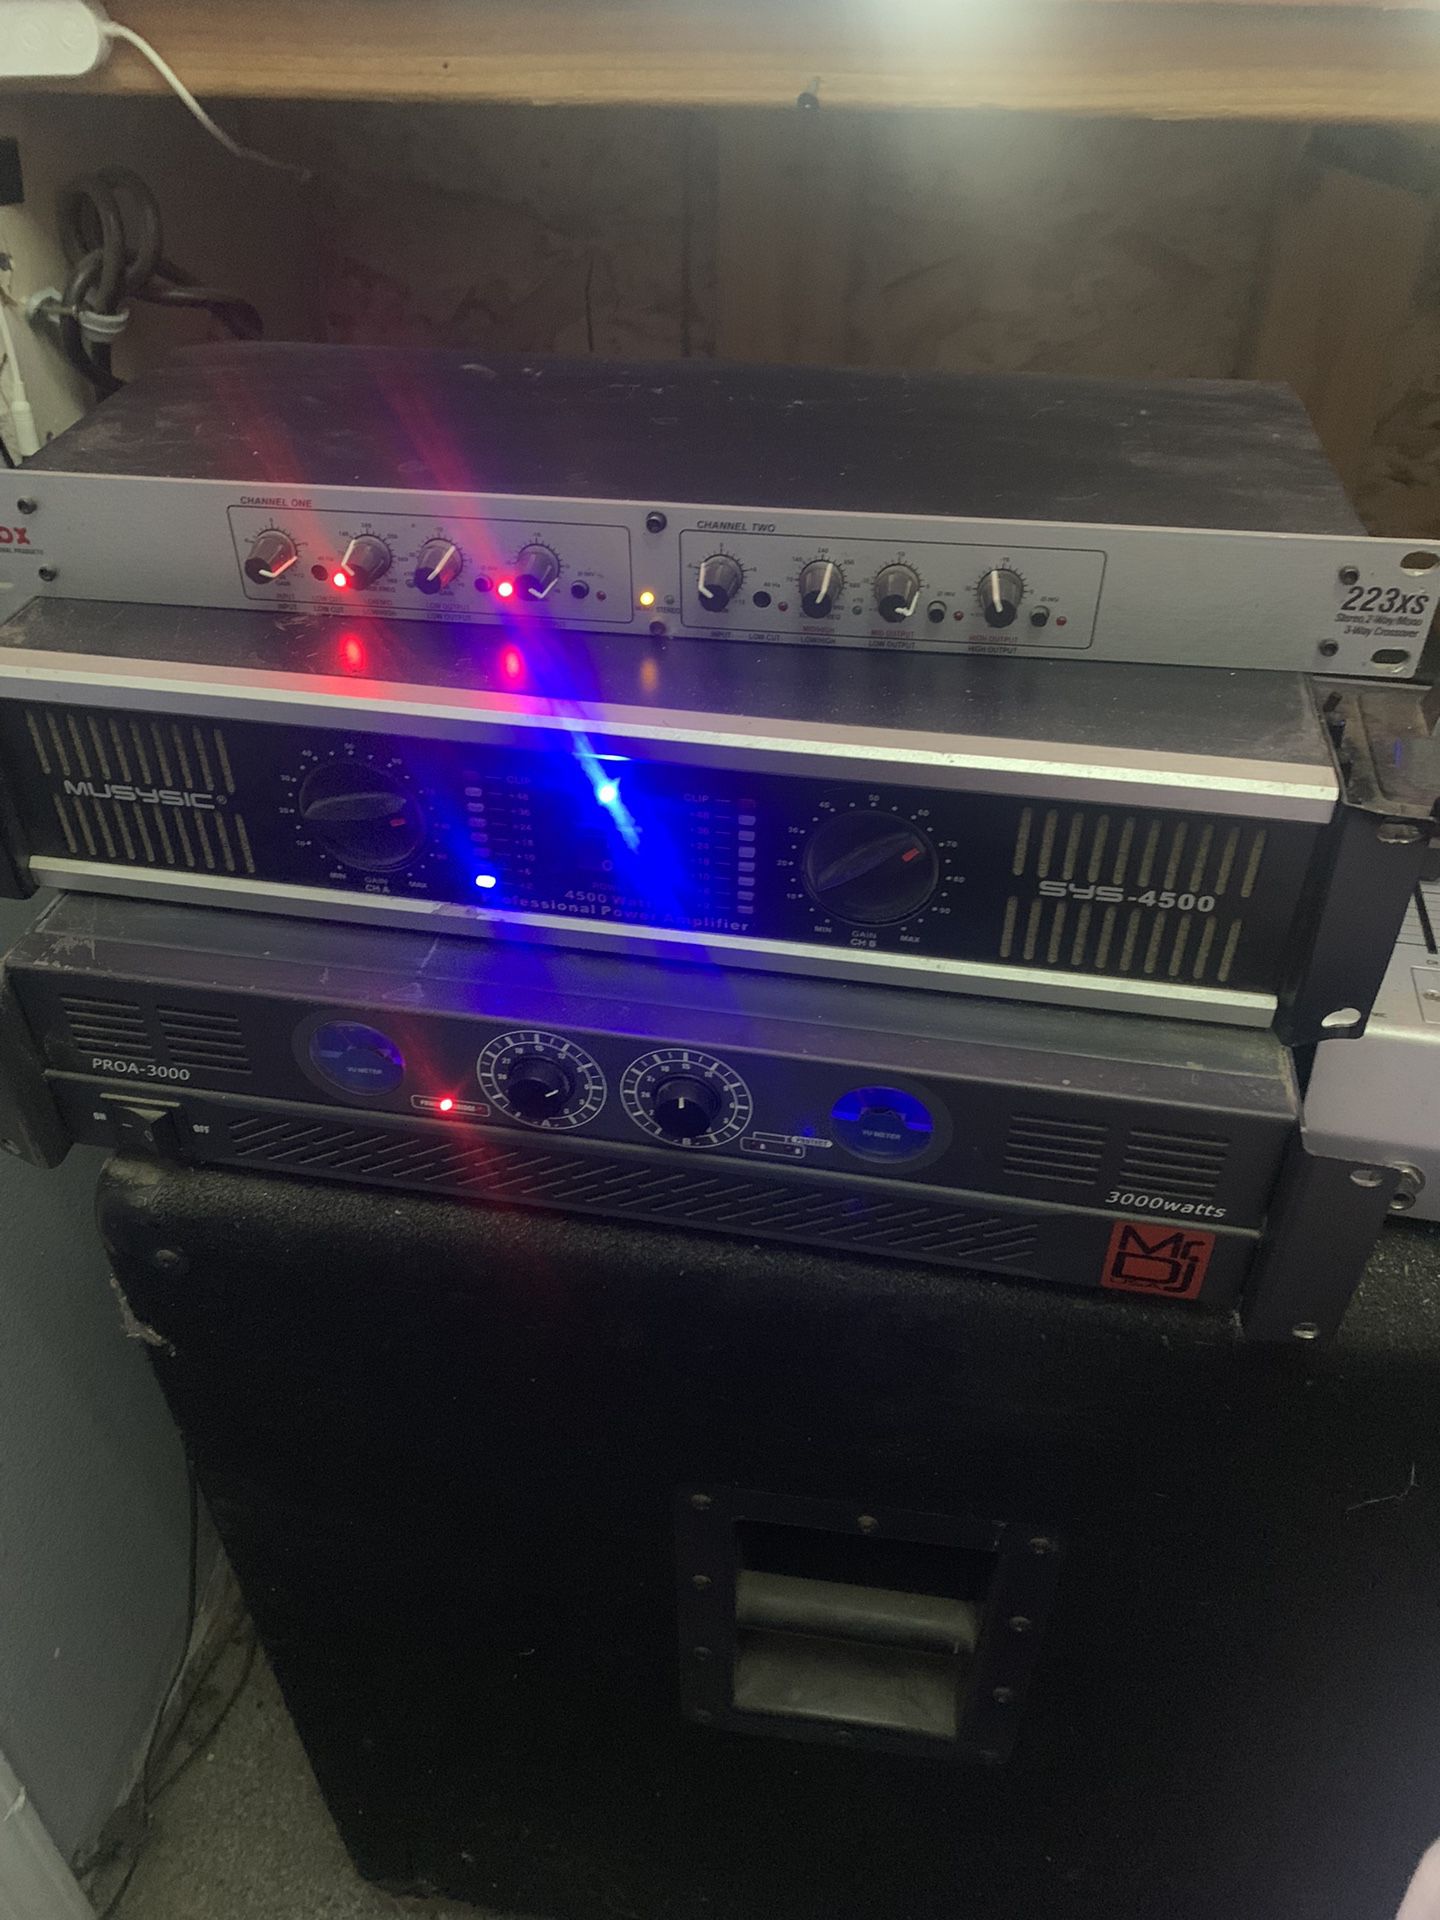 Musysic  Sys4500  Amplifier 